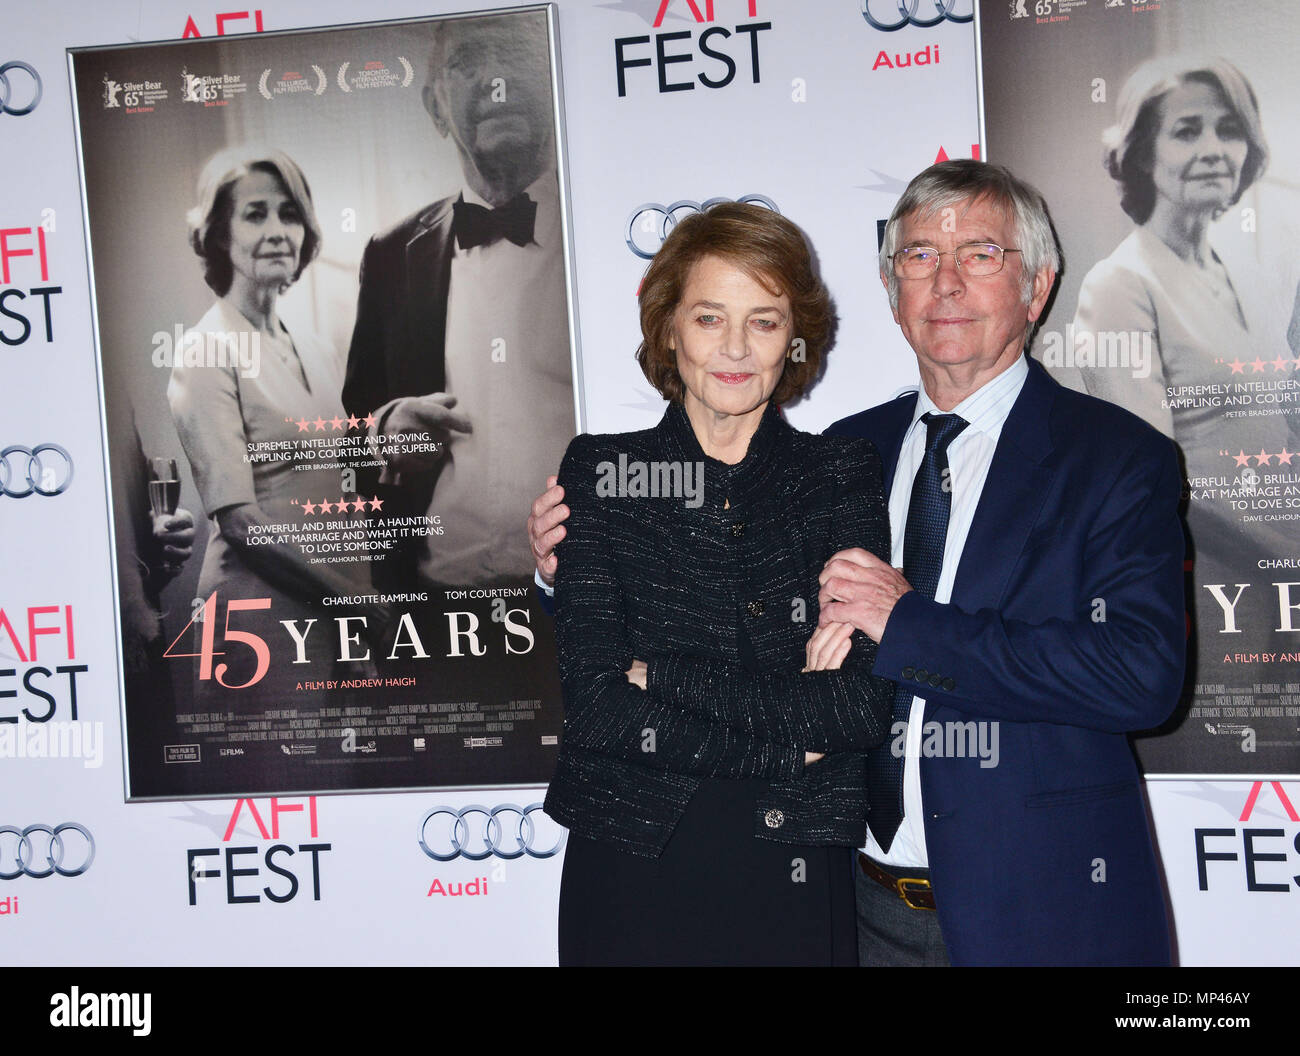 Charlotte Rambling, Tom Courtenay 006 at the Tribute to Charlotte Rampling and Tom Courtenay at the AFI Film Festival, 45 years ,  at the TCL Chinese Theatre in Los Angeles. November 11, 2015.Charlotte Rambling, Tom Courtenay 006 ------------- Red Carpet Event, Vertical, USA, Film Industry, Celebrities,  Photography, Bestof, Arts Culture and Entertainment, Topix Celebrities fashion /  Vertical, Best of, Event in Hollywood Life - California,  Red Carpet and backstage, USA, Film Industry, Celebrities,  movie celebrities, TV celebrities, Music celebrities, Photography, Bestof, Arts Culture and En Stock Photo